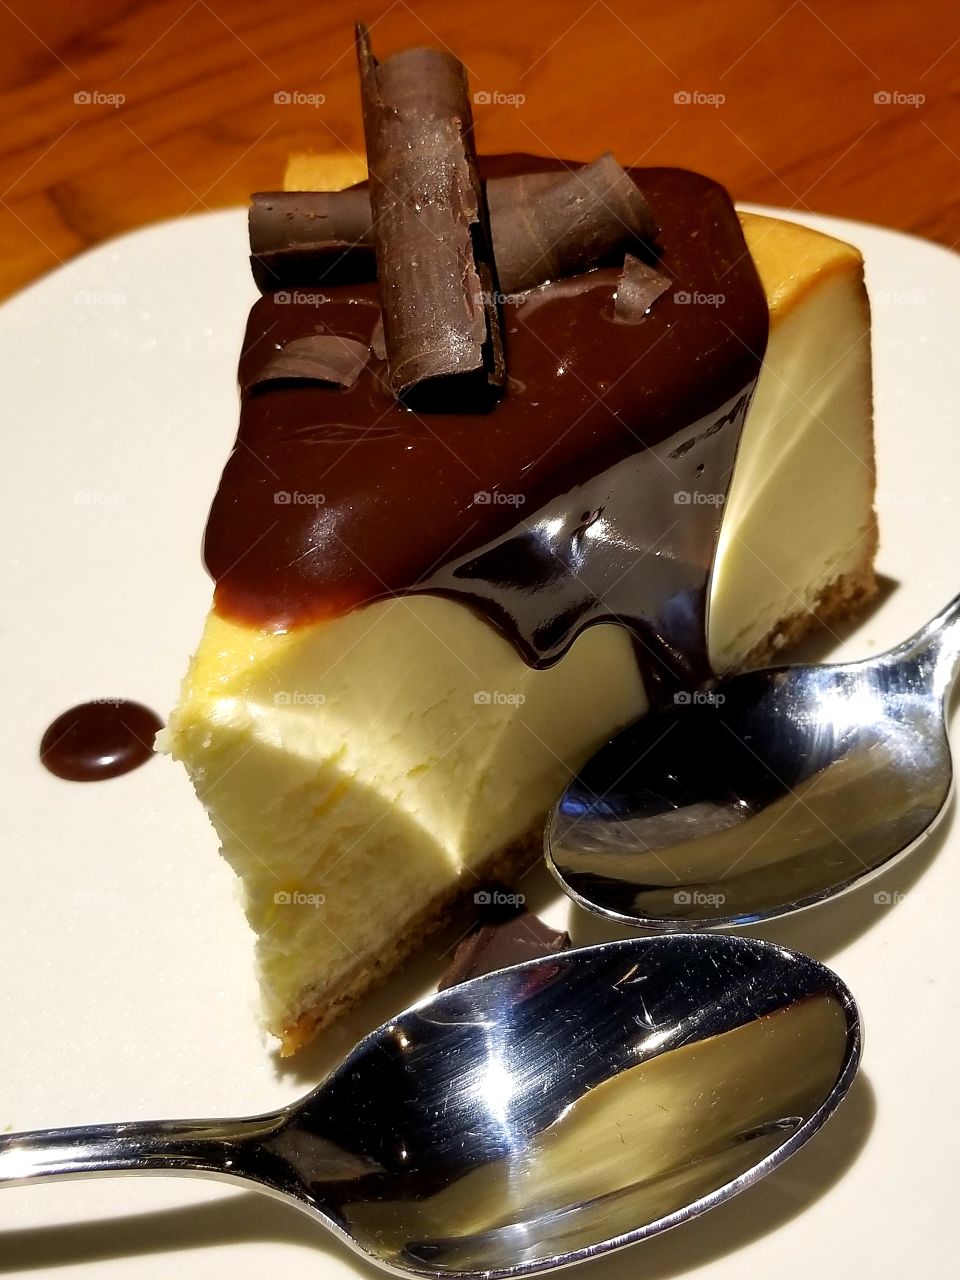 Chocolate cheesecake for two from Outback Steakhouse